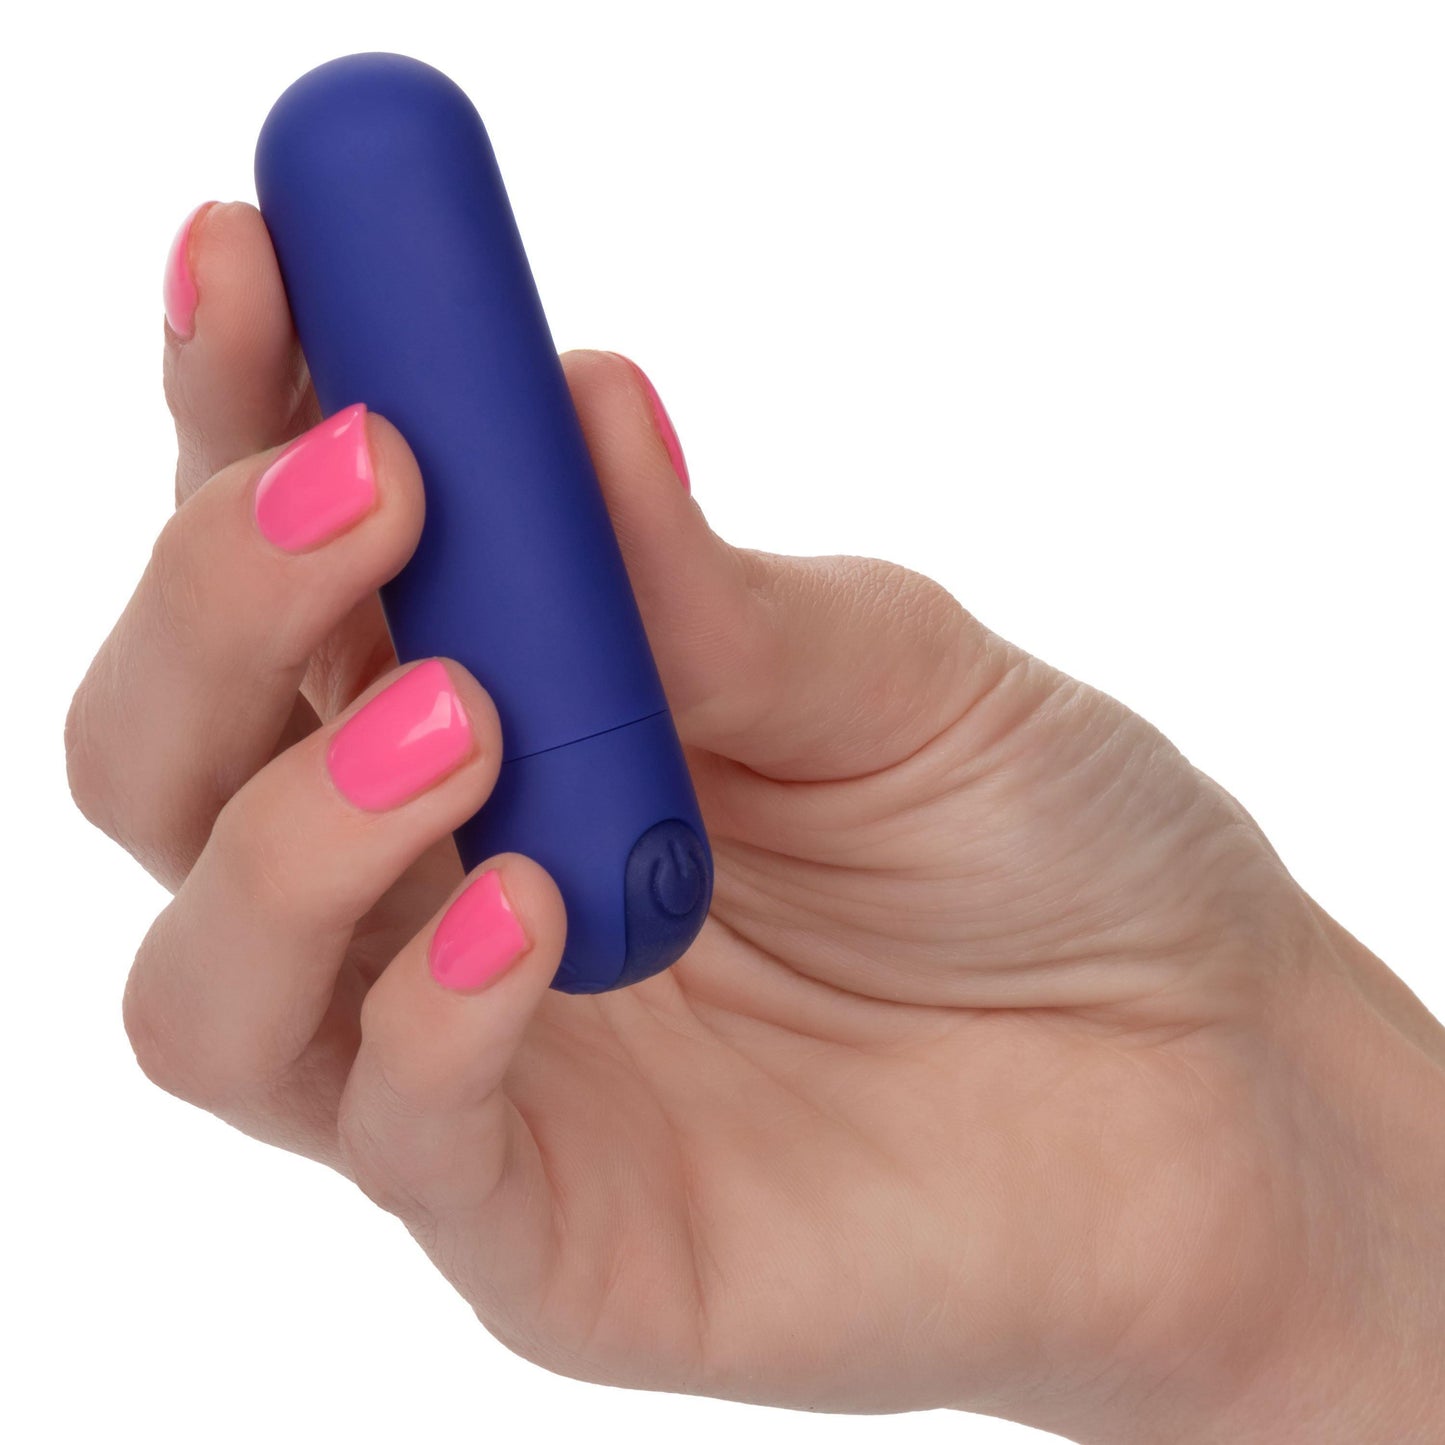 Rechargeable Hideaway Bullet - Blue - My Sex Toy Hub